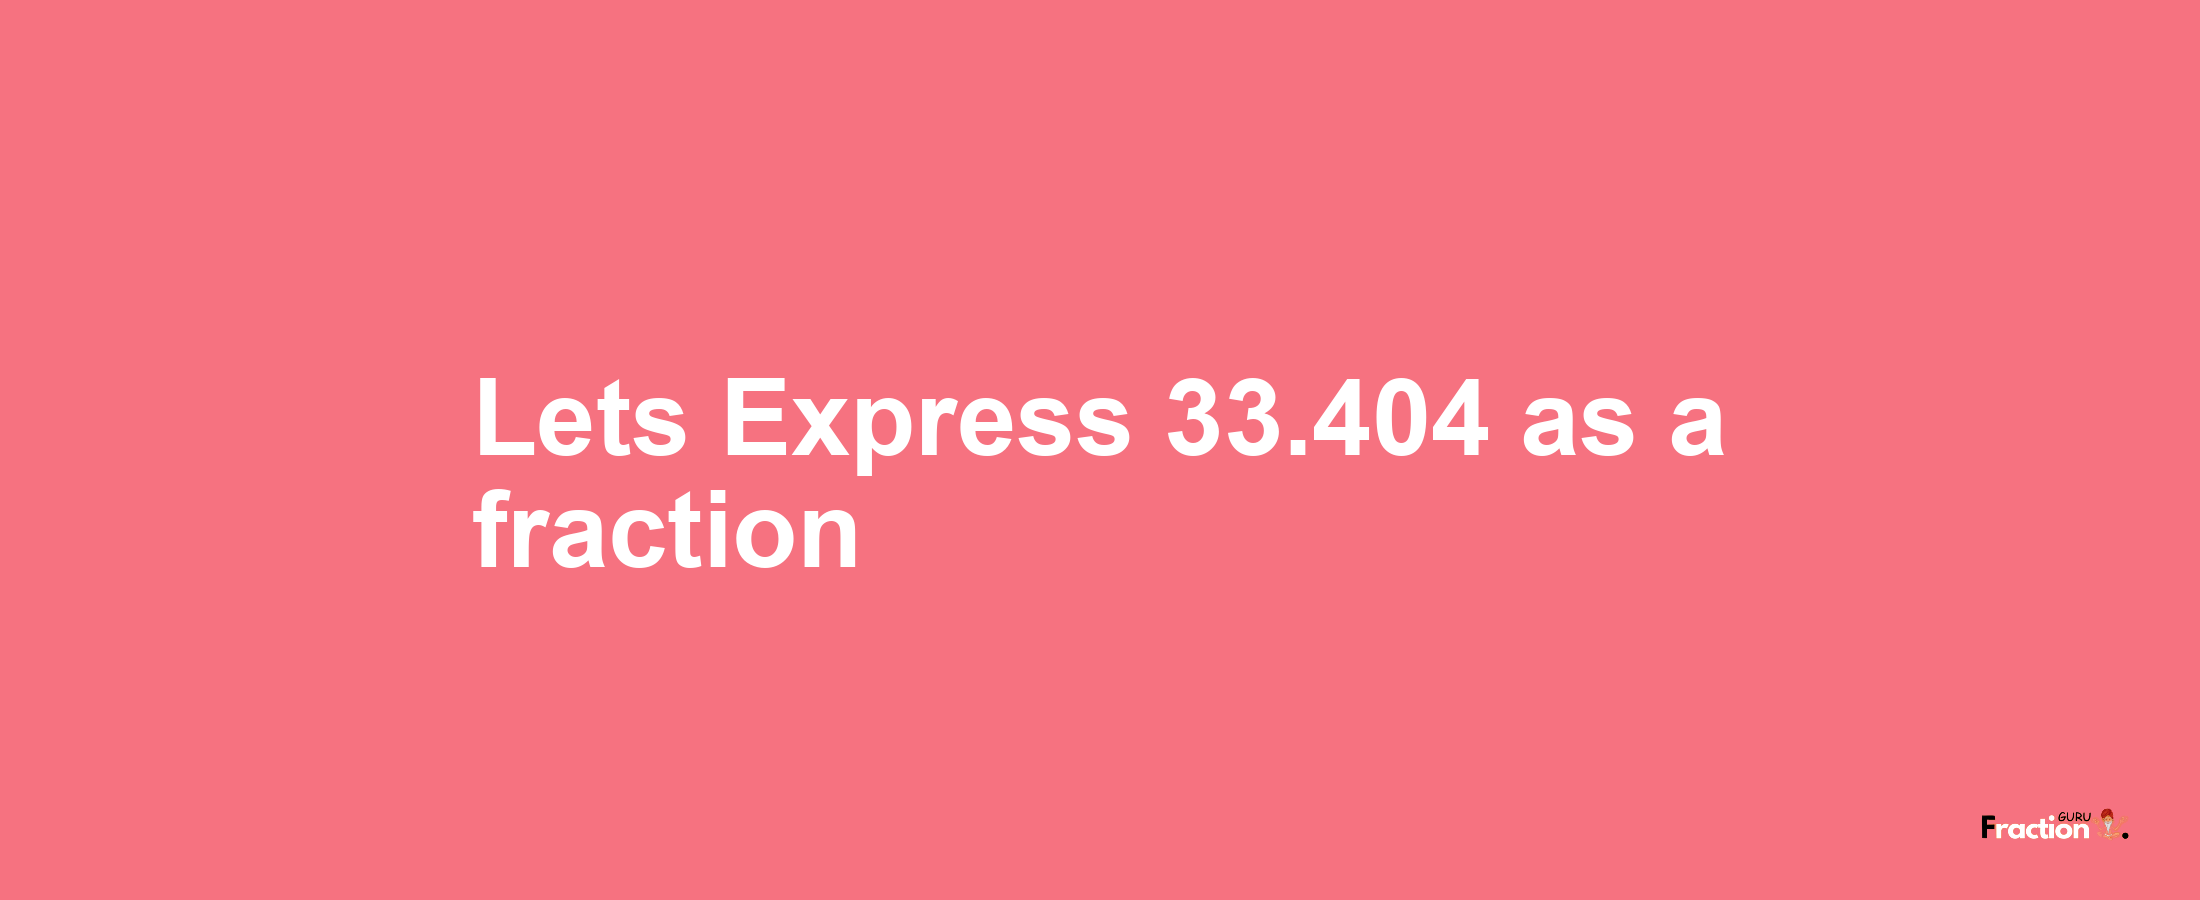 Lets Express 33.404 as afraction